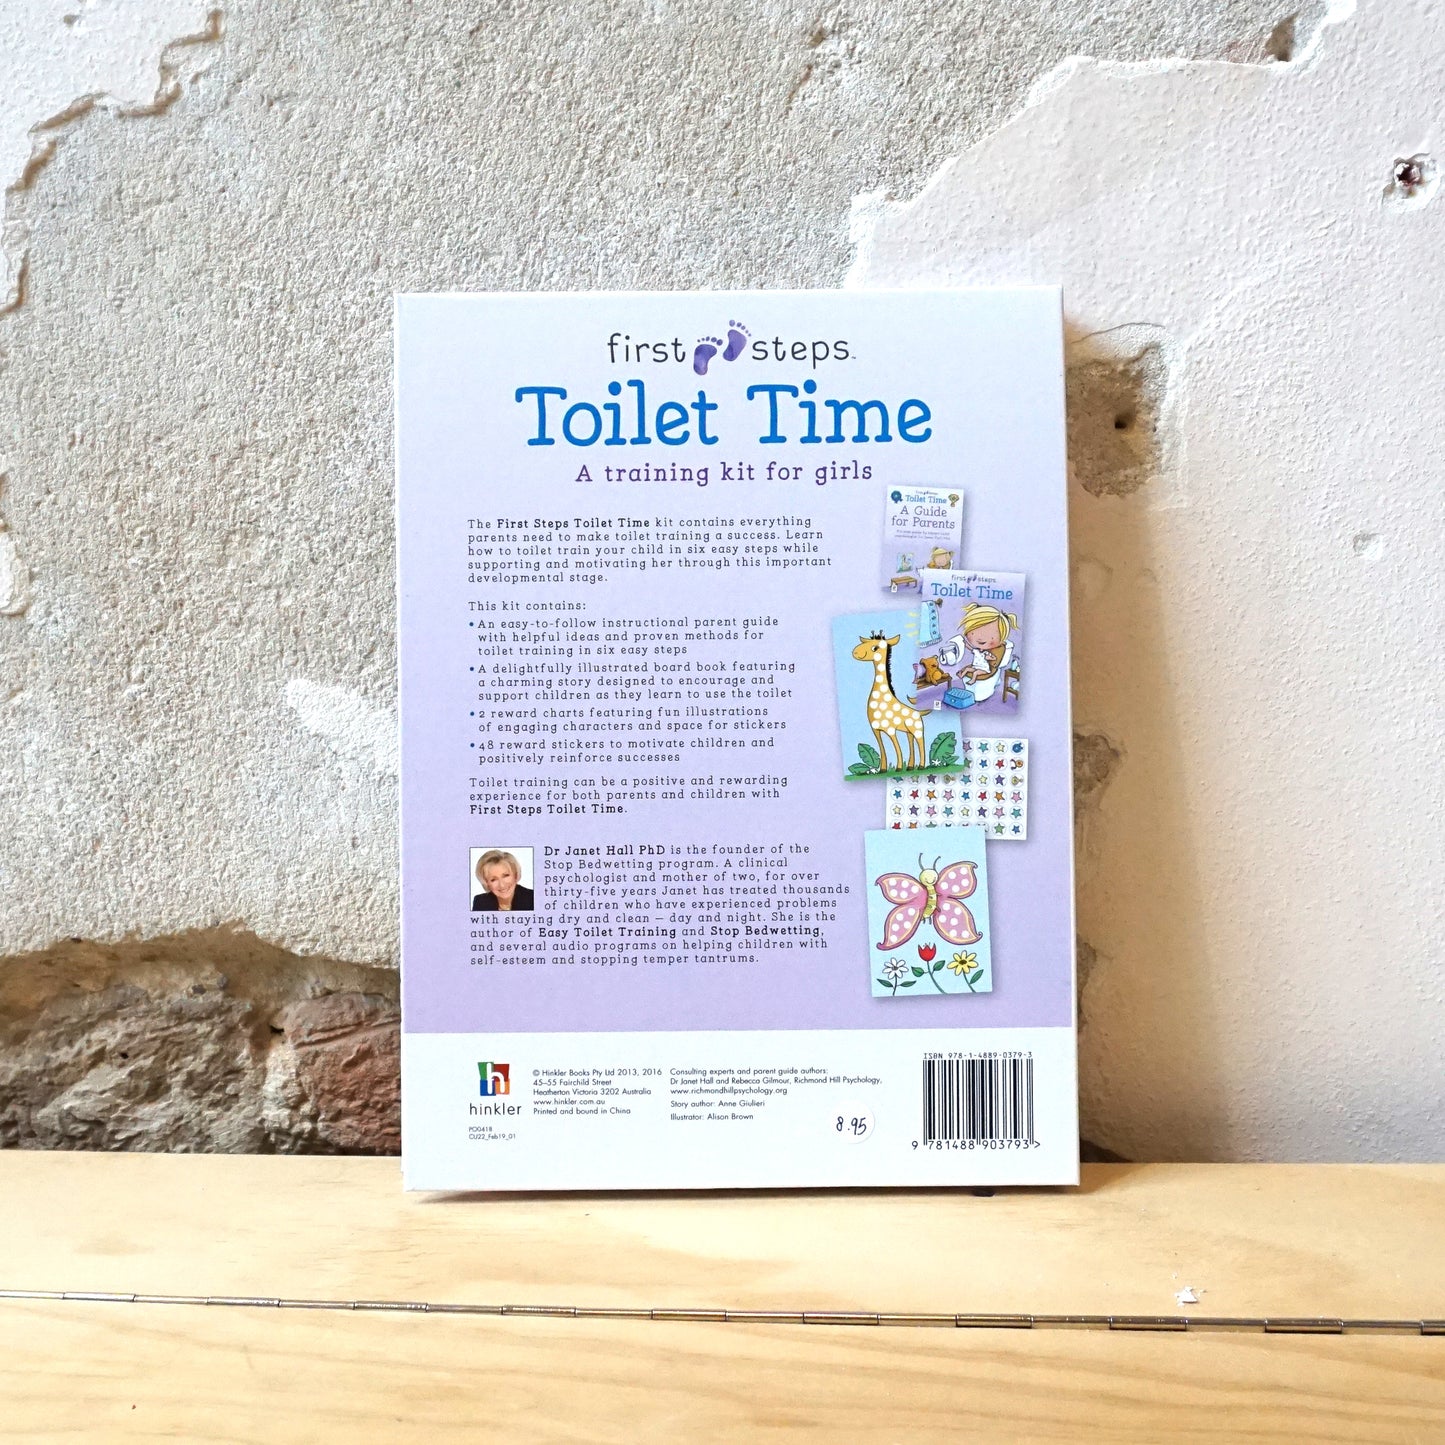 Toilet Time: A Training Kit for Girls – Dr. Janet Hall